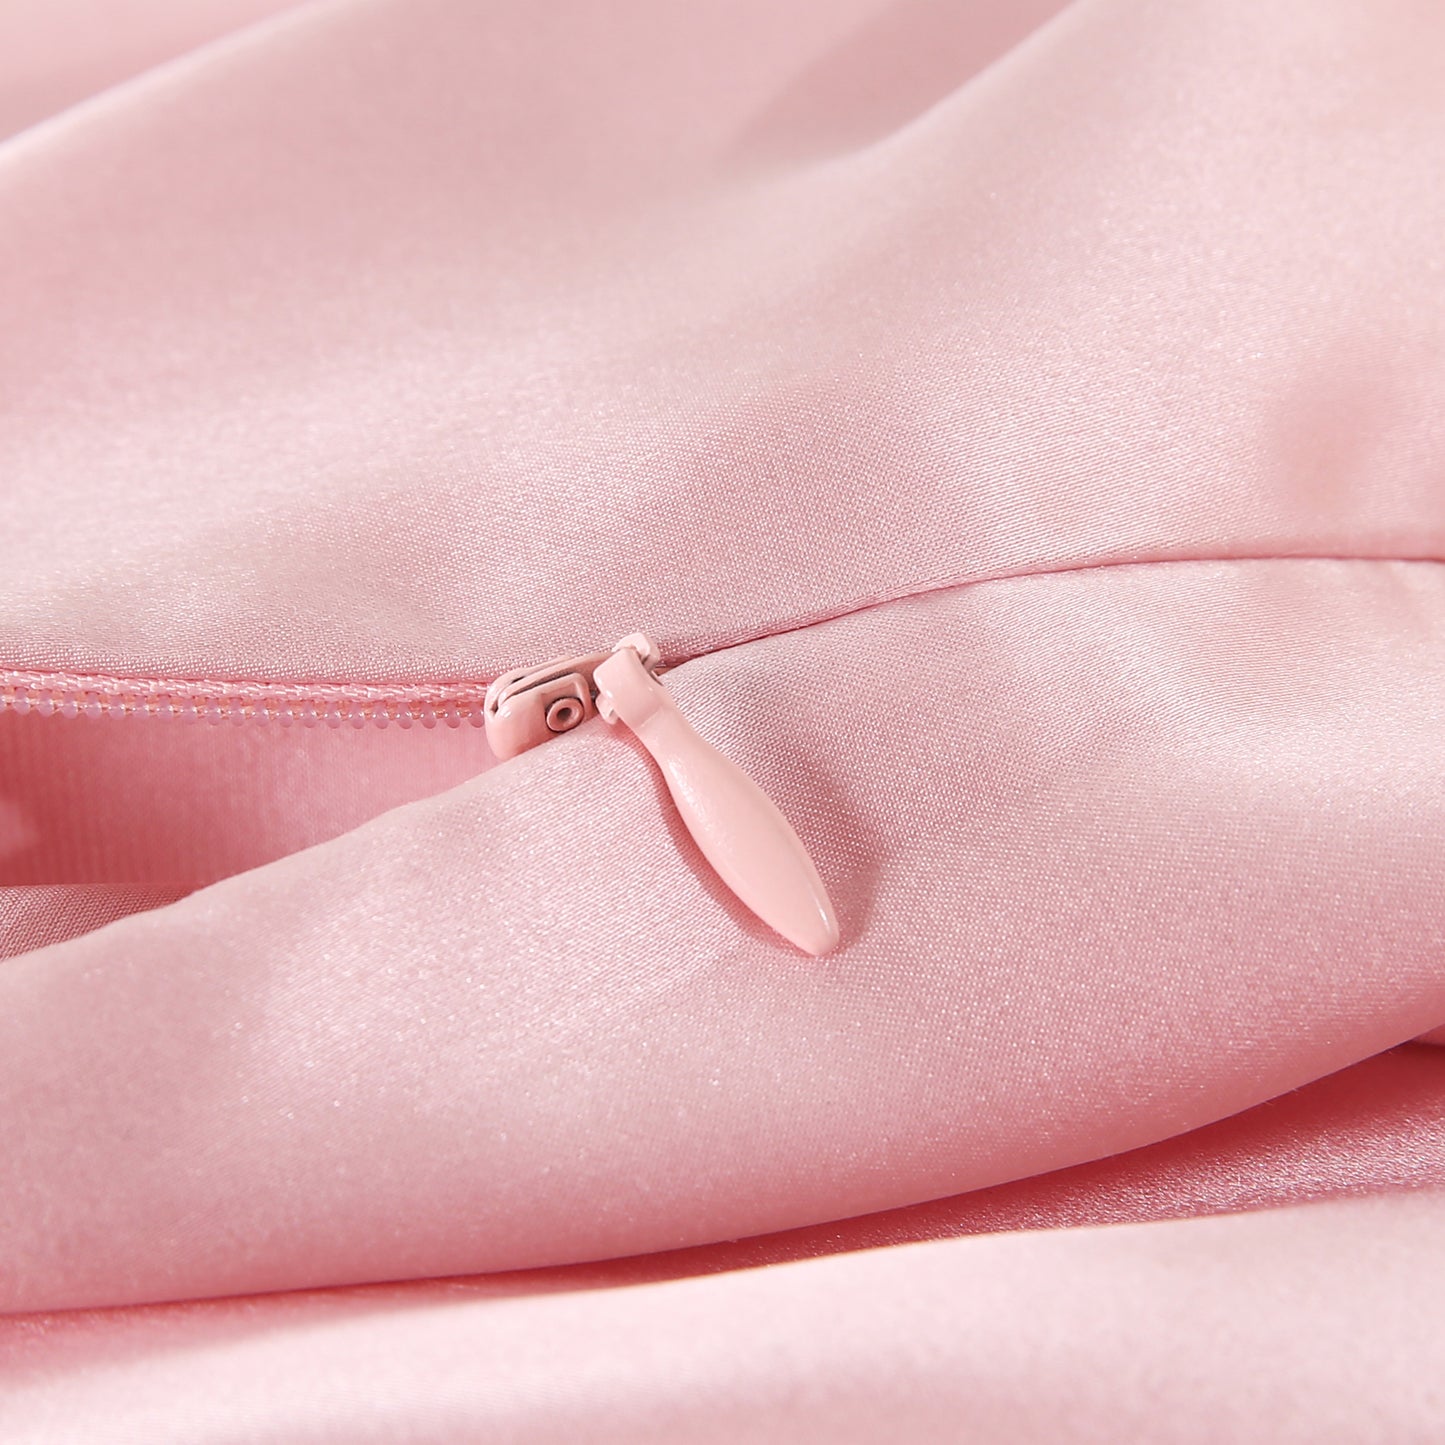 Image of a Sedosa pillowcase, focusing on the invisible zipper closing